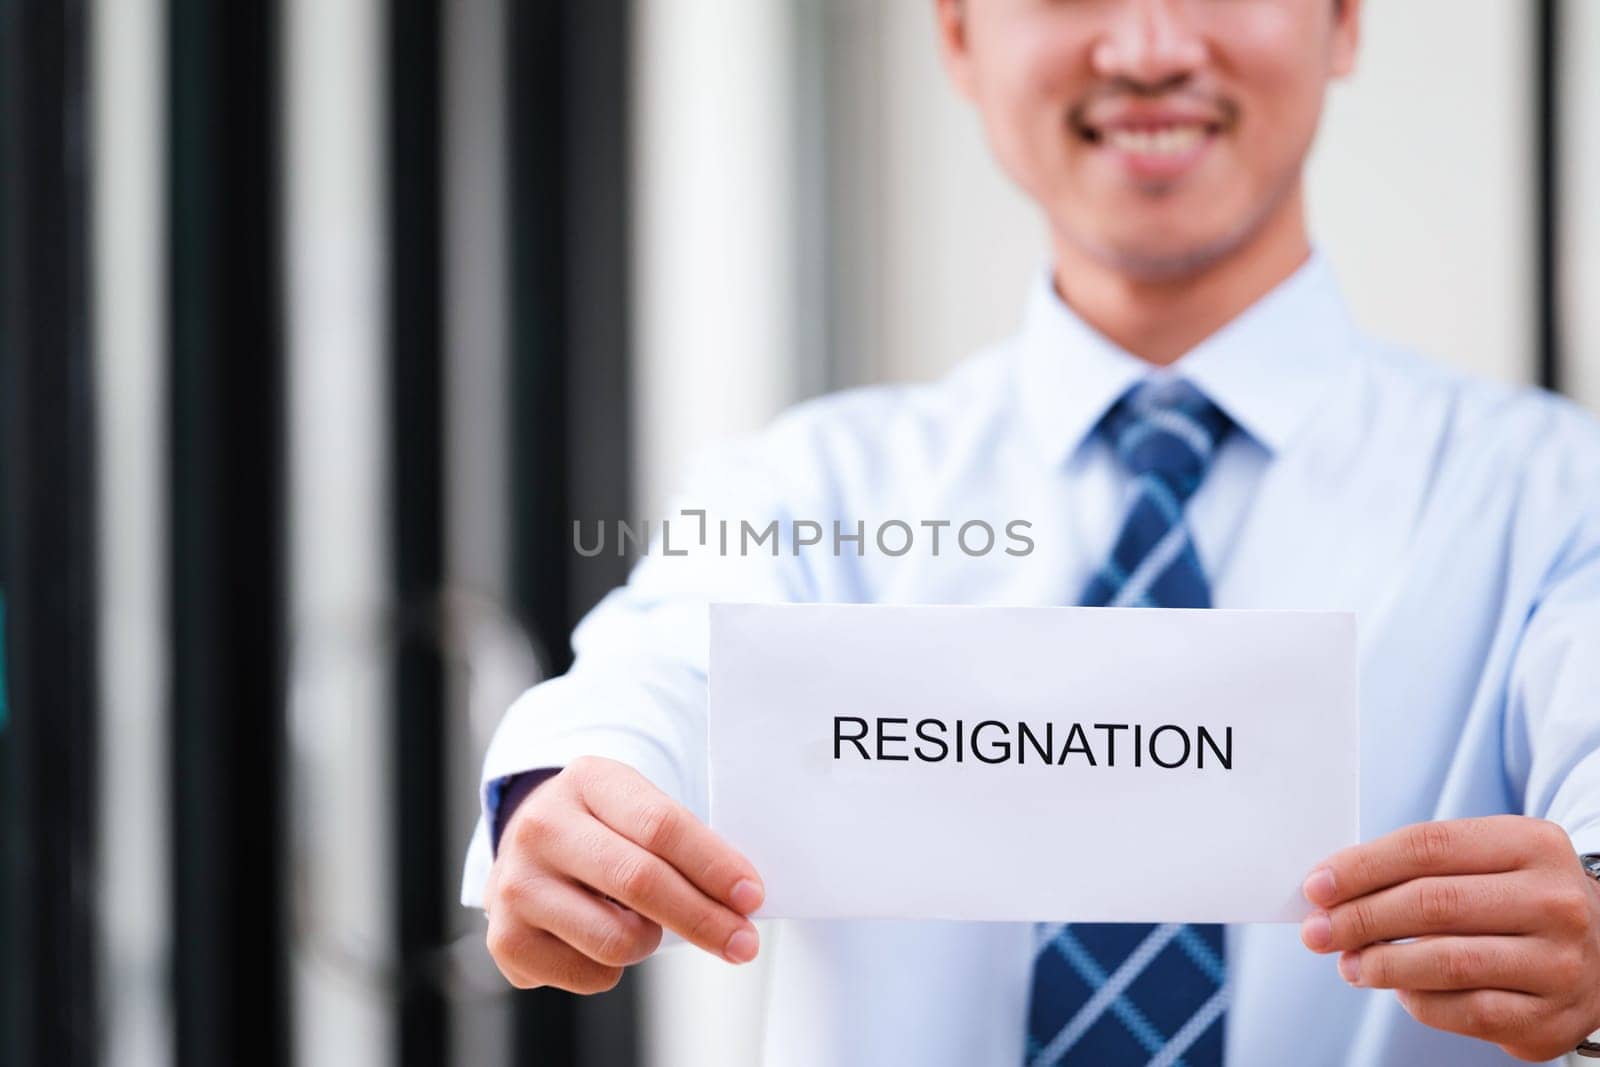 Confident Man Holding Up Resignation Letter with a Smile, Signaling a Positive Transition and Optimistic Outlook on Future Endeavors